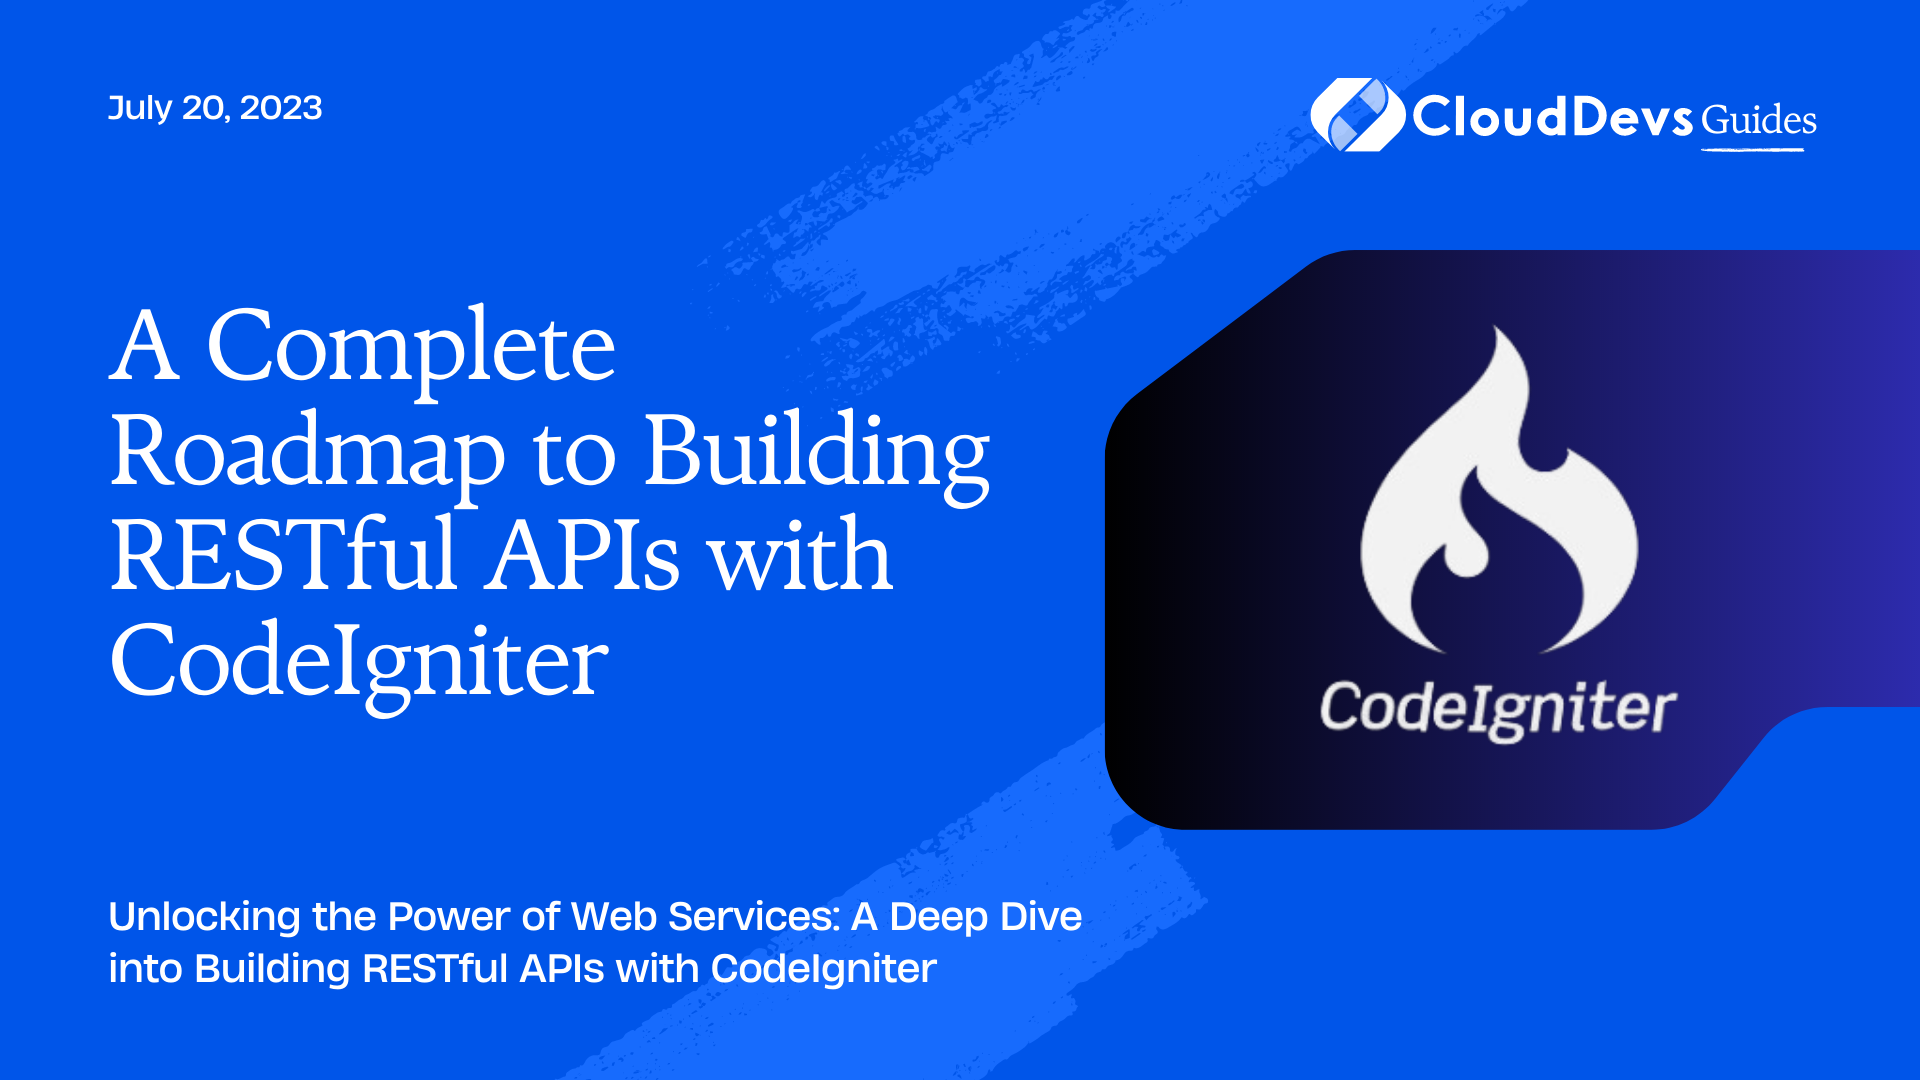 A Complete Roadmap to Building RESTful APIs with CodeIgniter